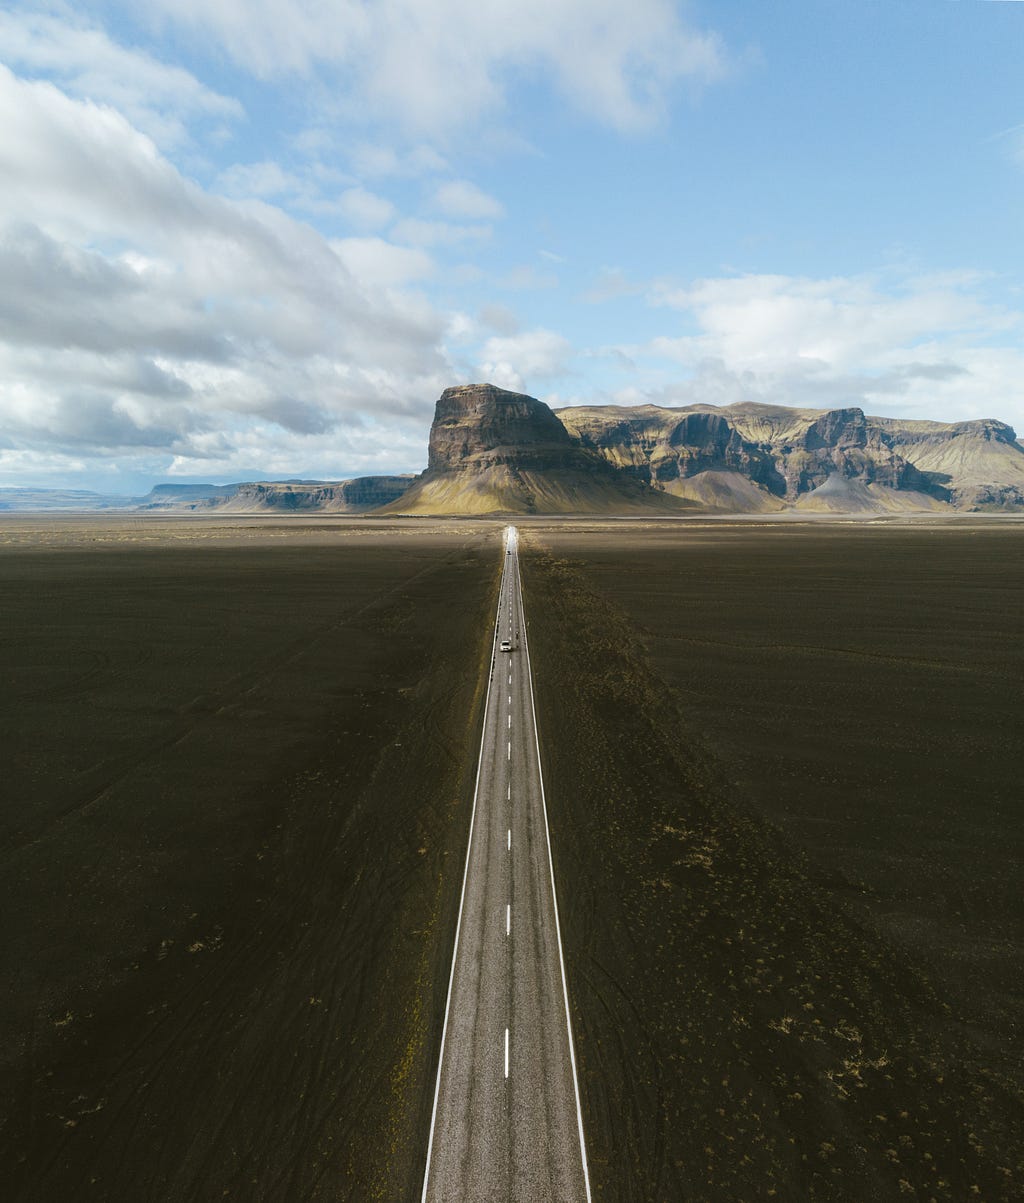 Aerial view of a long straight stretch of road leading toward desert plateaus. A single car is driving on the road, implying a long journey in a vast land of possibility.